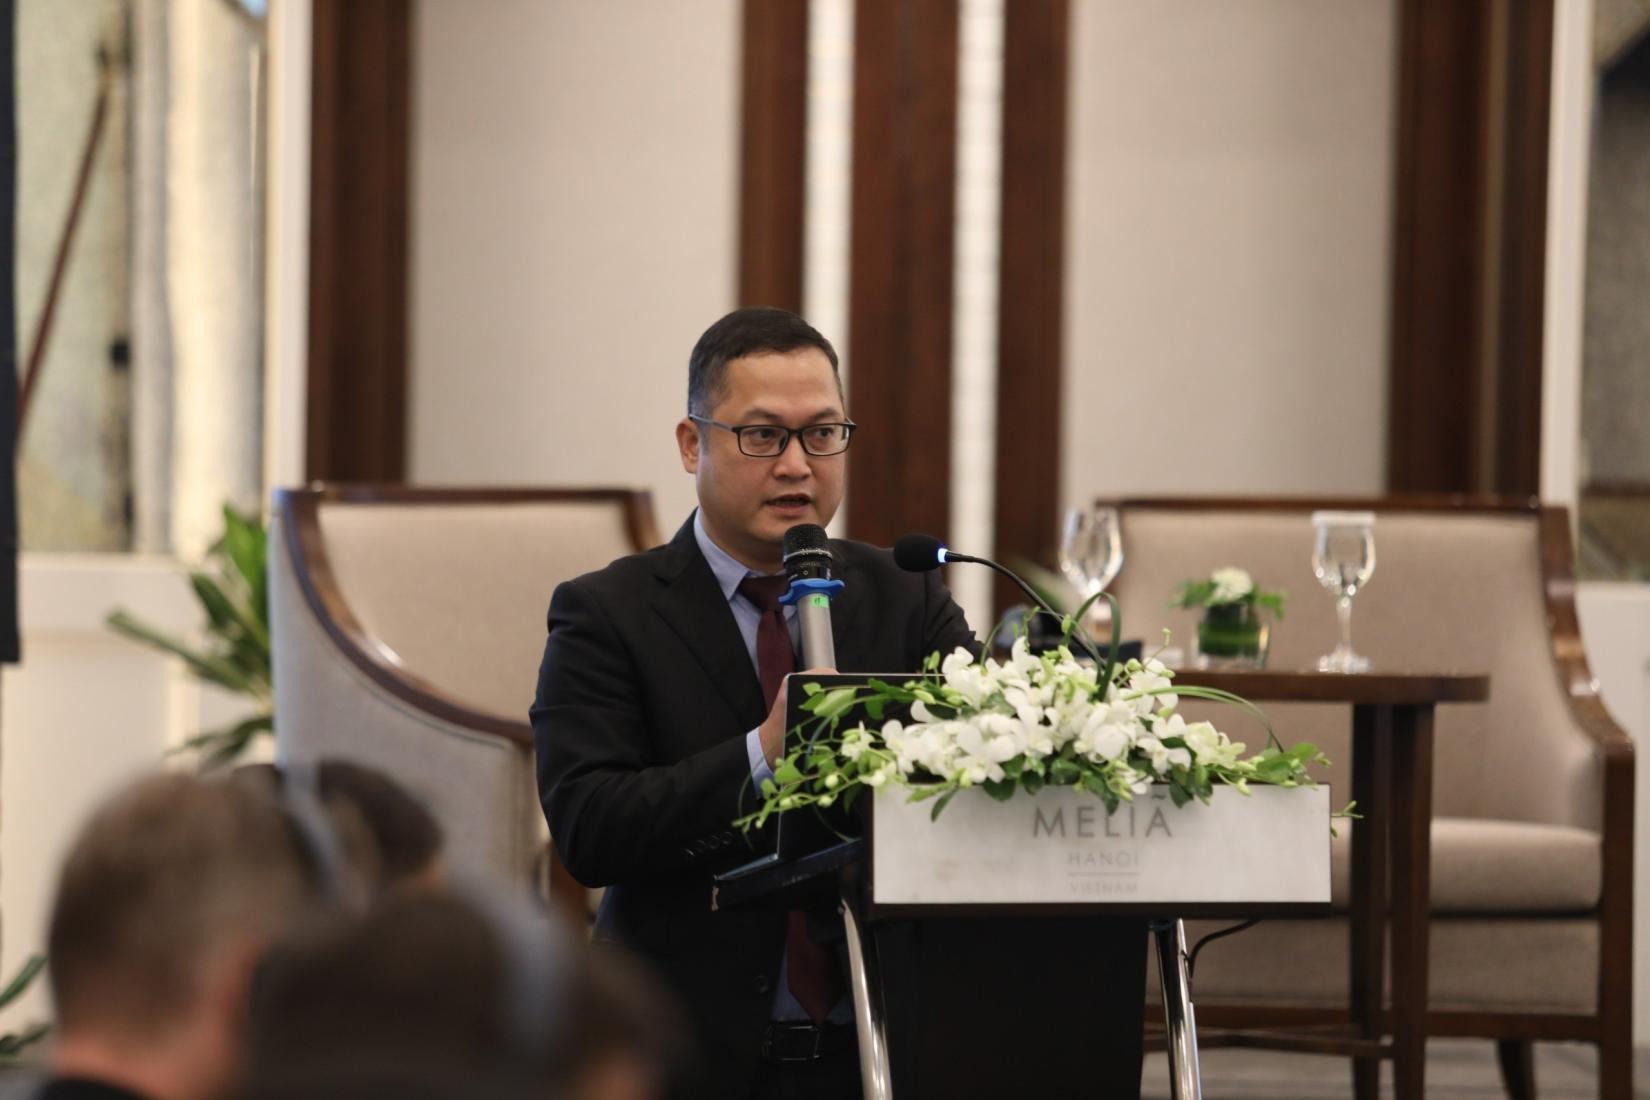 Dr. Le Viet Anh, Director-General of the Department of Science, Education, Natural Resources and Environment, Ministry of Planning and Investment